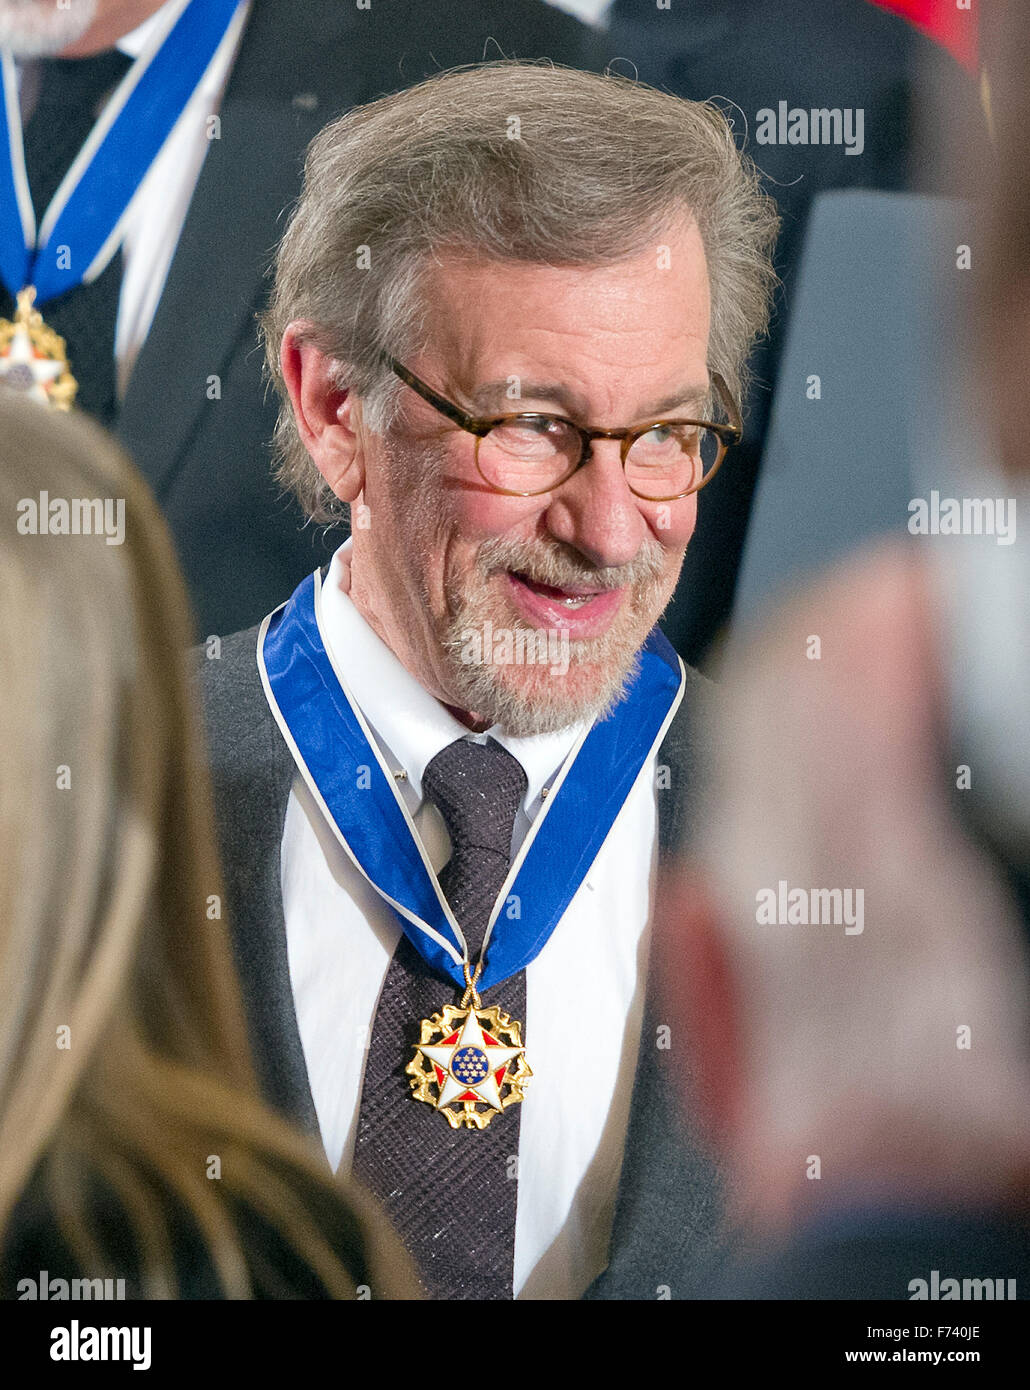 Presidential Medal of Freedom recipient Steven Spielberg wears her award as he departs following the ceremony in the East Room of the White House in Washington, DC on Tuesday, November 24, 2015. The Medal is the highest US civilian honor, presented to individuals who have made especially meritorious contributions to the security or national interests of the US, to world peace, or to cultural or significant public or private endeavors. Photo: Ron Sachs/CNP/dpa - NO WIRE SERVICE - Stock Photo